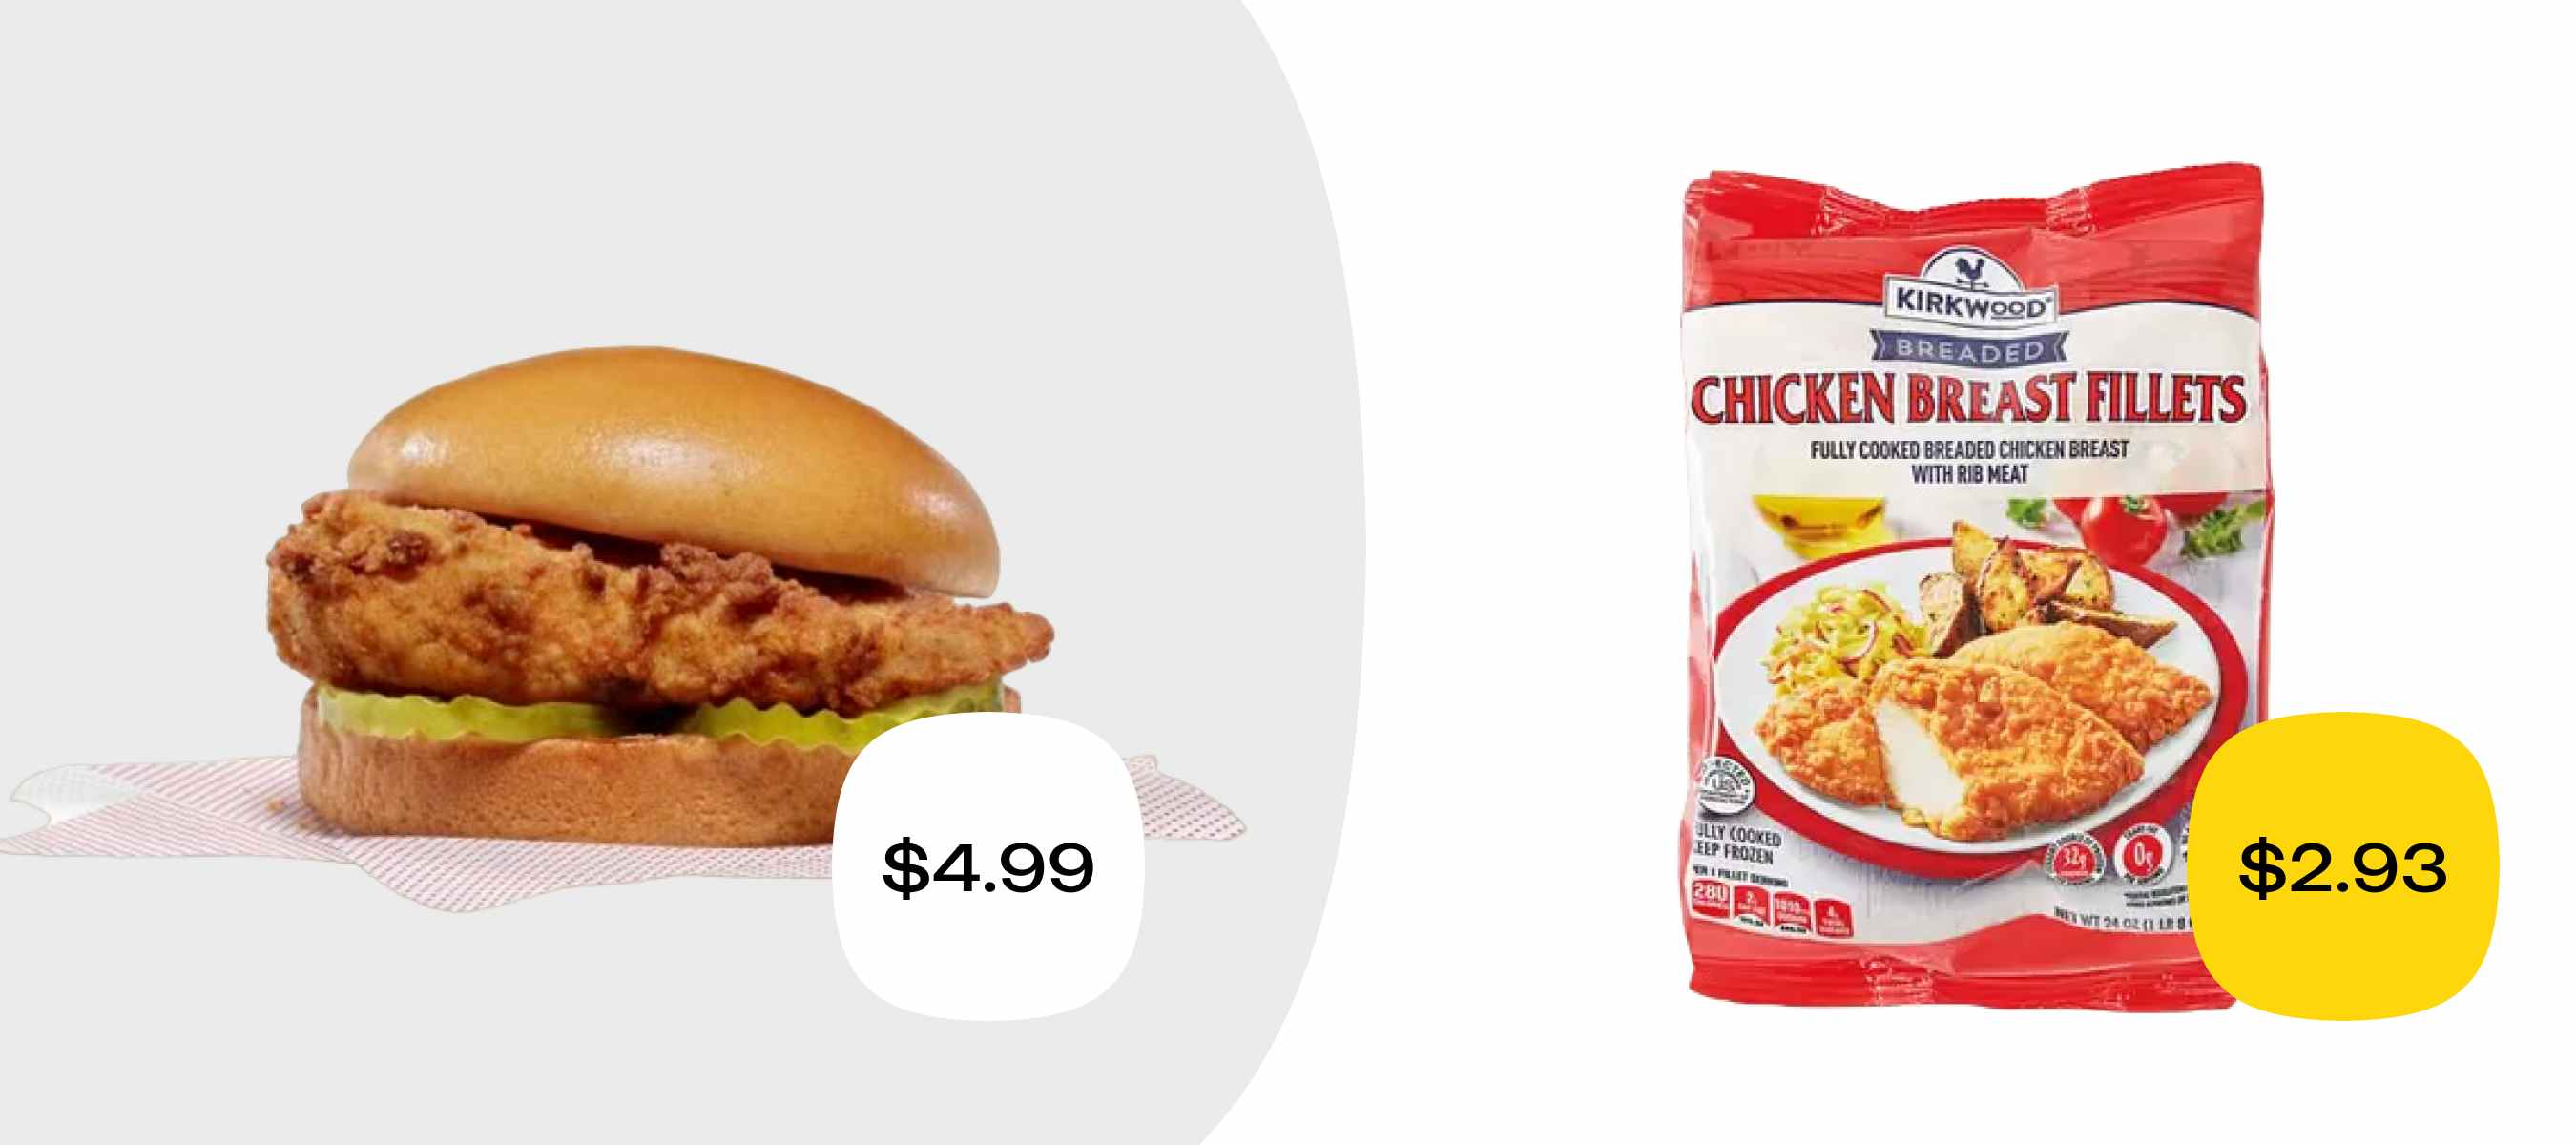 a chicken sandwich from chick-fil-a for $4.99 versus a similar product from aldi for $2.93